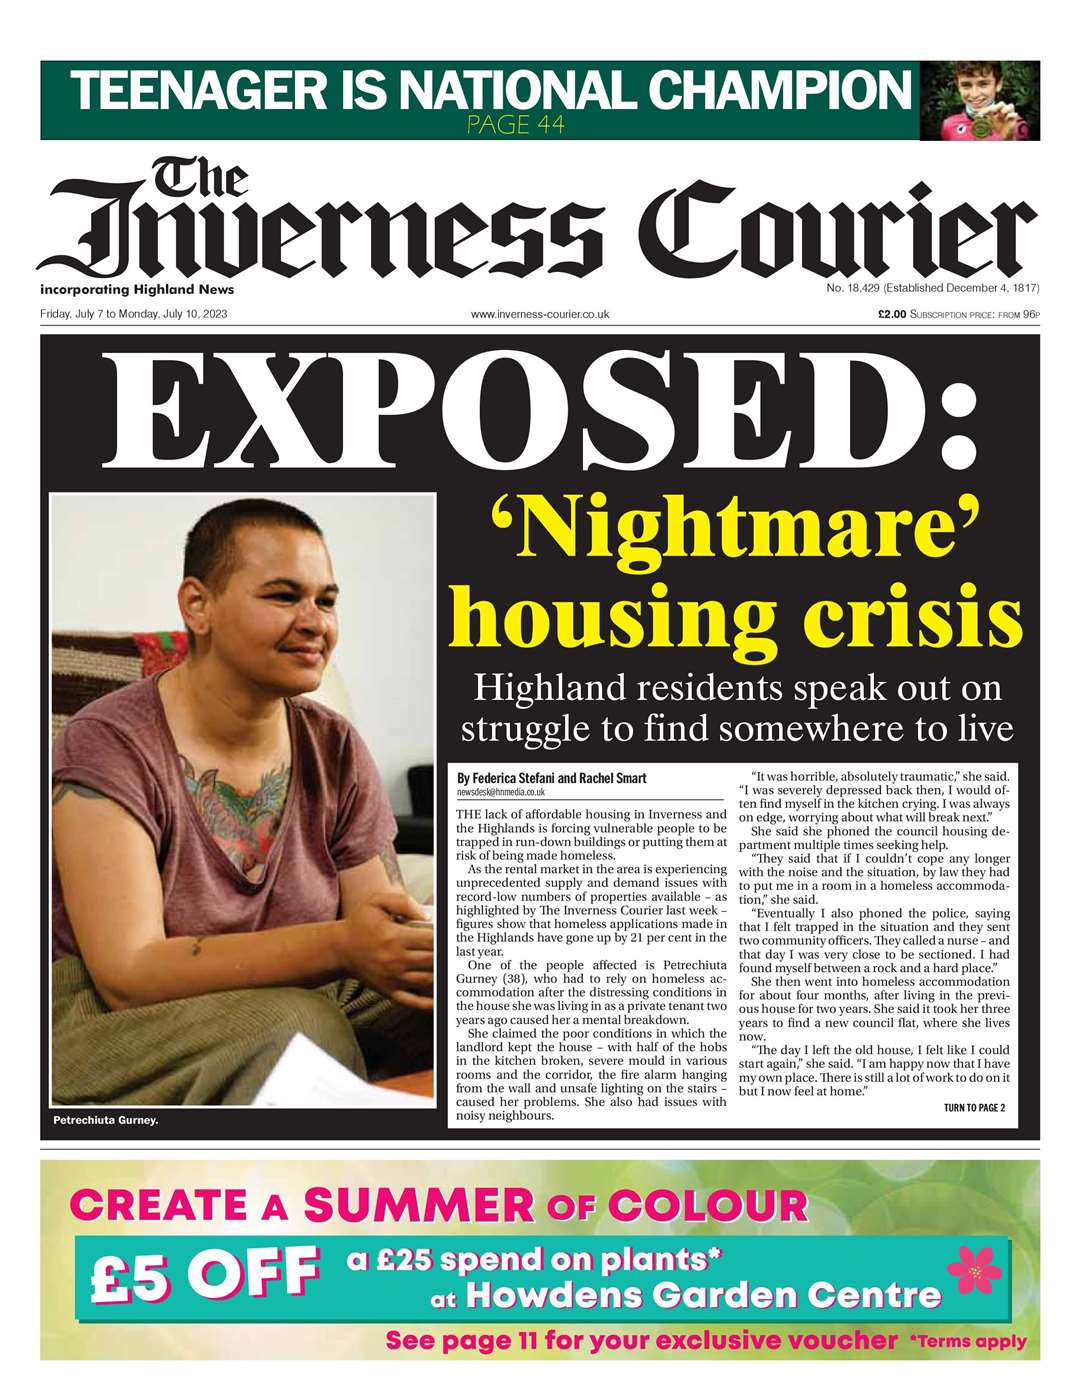 The Inverness Courier, July 7, front page.